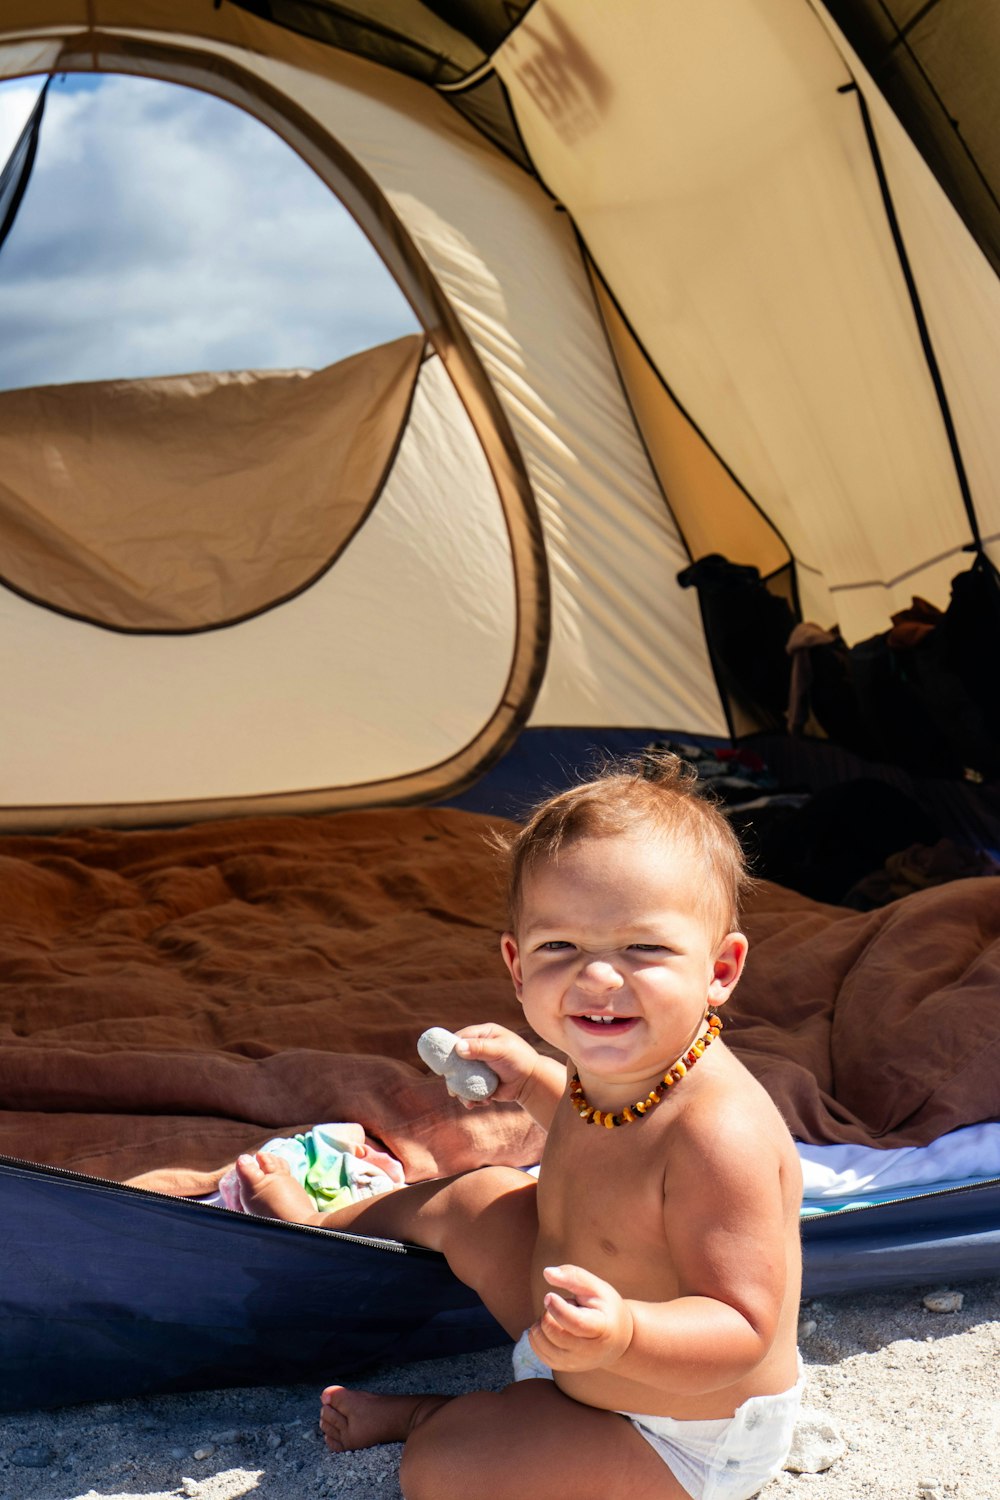 a baby in a diaper playing with a toothbrush in front of a tent